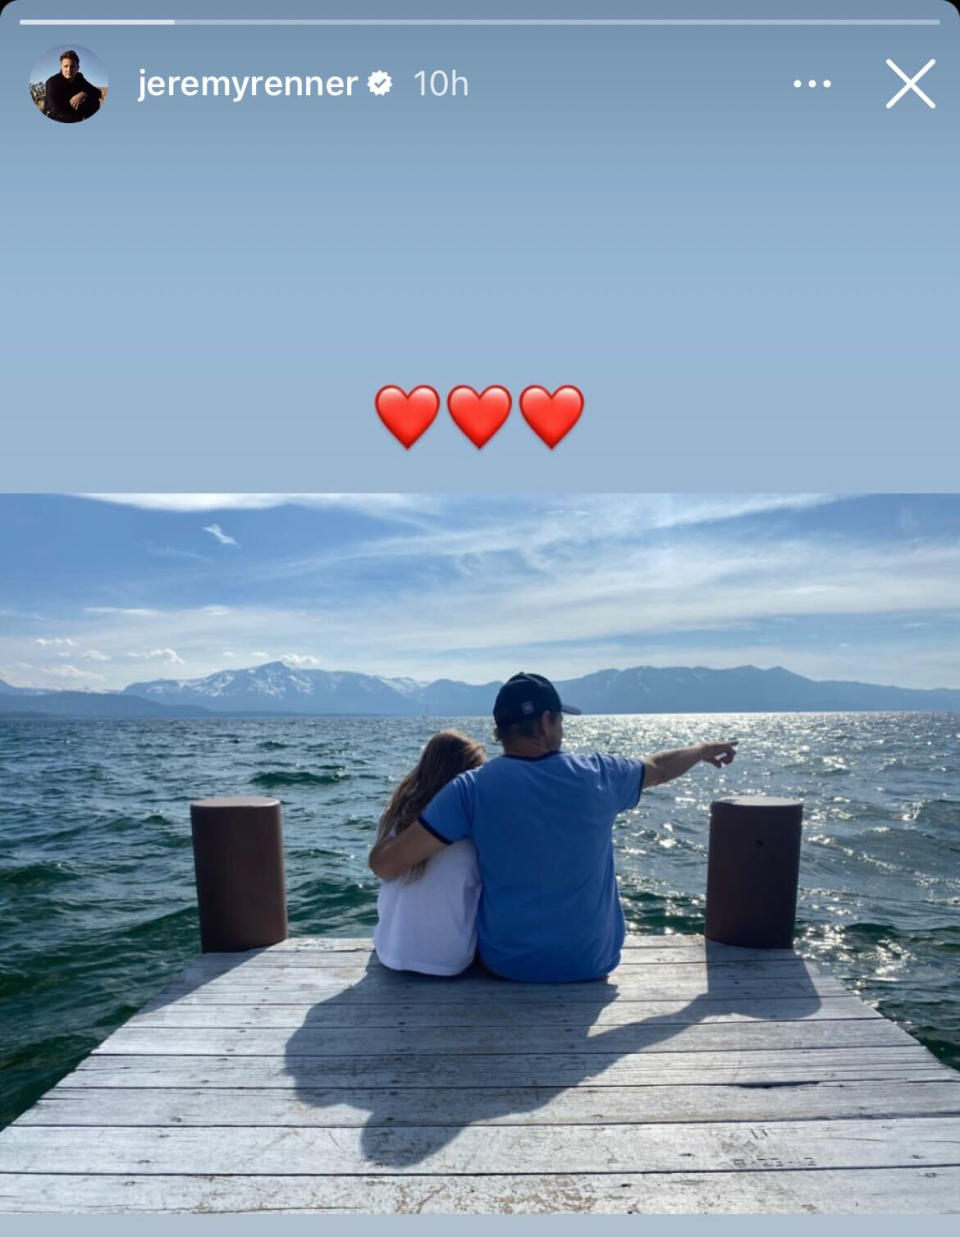 Renner sits at the end of a dock overlooking a lake with mountains in the distance. He points to the right with his right hand, while his left hand is wrapped around his daughter. (Jeremy Renner / Instagram)